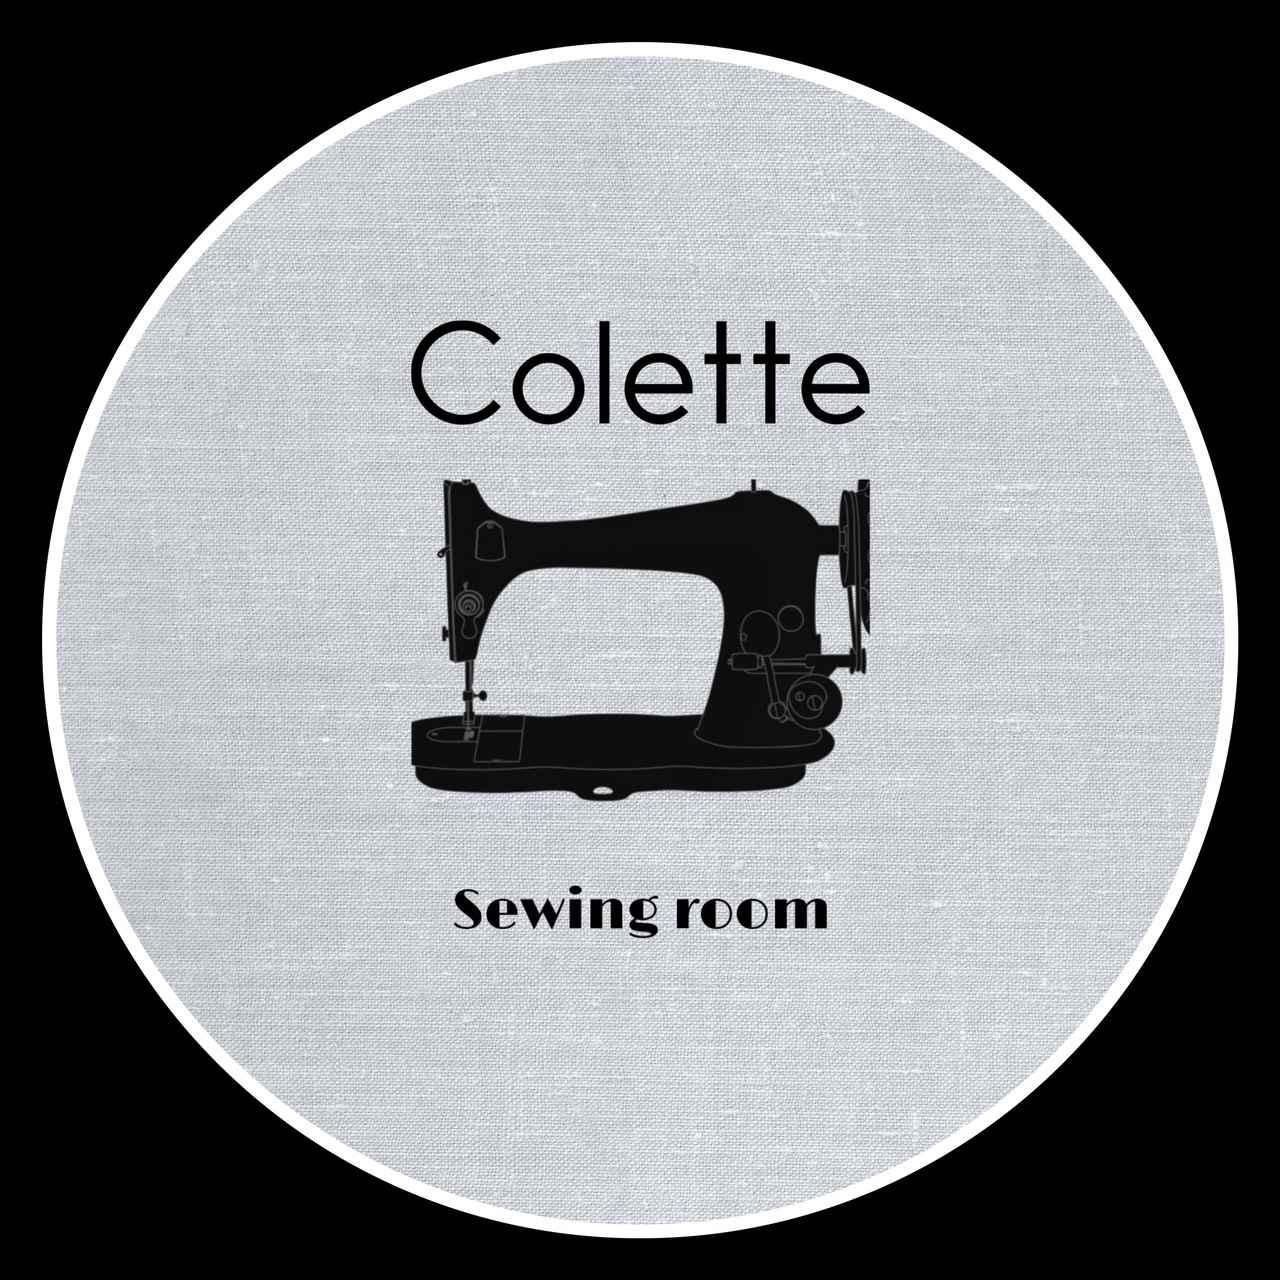 sewing room Colette ソーイング　ルーム　コレット